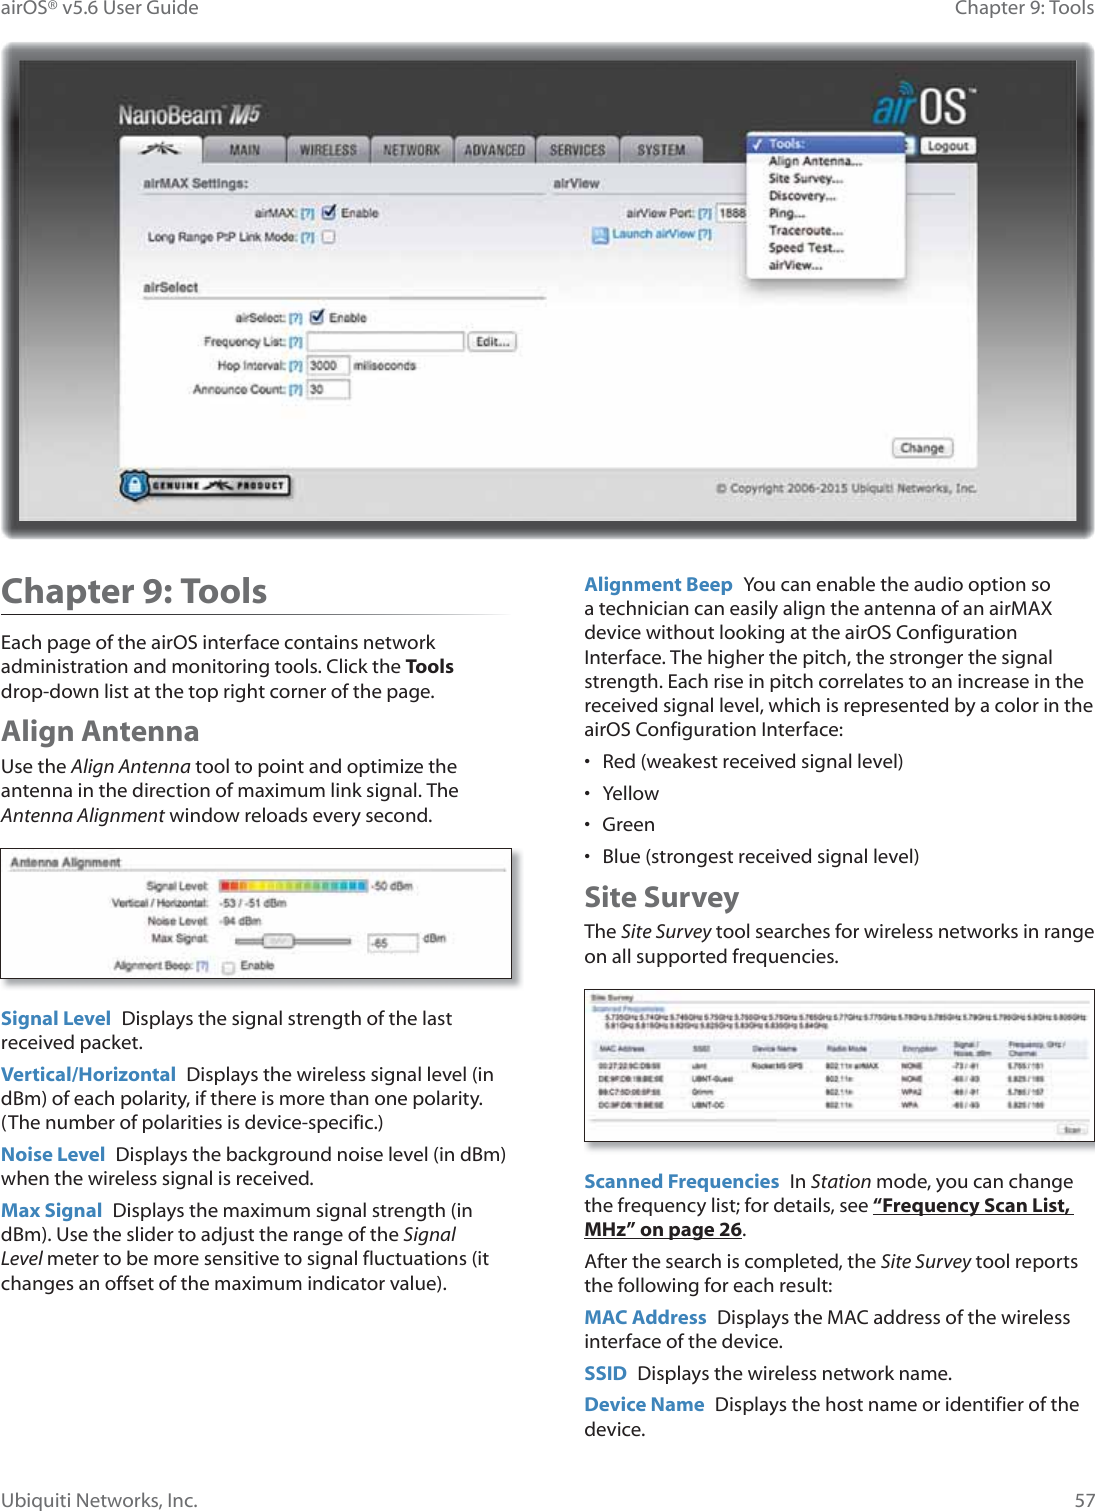 57Chapter 9: ToolsairOS® v5.6 User GuideUbiquiti Networks, Inc.Chapter 9: ToolsEach page of the airOS interface contains network administration and monitoring tools. Click the Tools drop-down list at the top right corner of the page.Align AntennaUse the Align Antenna tool to point and optimize the antenna in the direction of maximum link signal. The Antenna Alignment window reloads every second.Signal Level  Displays the signal strength of the last received packet.Vertical/Horizontal  Displays the wireless signal level (in dBm) of each polarity, if there is more than one polarity. (The number of polarities is device-specific.)Noise Level  Displays the background noise level (in dBm) when the wireless signal is received.Max Signal  Displays the maximum signal strength (in dBm). Use the slider to adjust the range of the Signal Level meter to be more sensitive to signal fluctuations (it changes an offset of the maximum indicator value).Alignment Beep  You can enable the audio option so a technician can easily align the antenna of an airMAX device without looking at the airOS Configuration Interface. The higher the pitch, the stronger the signal strength. Each rise in pitch correlates to an increase in the received signal level, which is represented by a color in the airOS Configuration Interface:•  Red (weakest received signal level)• Yellow• Green•  Blue (strongest received signal level)Site SurveyThe Site Survey tool searches for wireless networks in range on all supported frequencies.Scanned Frequencies  In Station mode, you can change the frequency list; for details, see “Frequency Scan List, MHz” on page 26.After the search is completed, the Site Survey tool reports the following for each result:MAC Address  Displays the MAC address of the wireless interface of the device.SSID  Displays the wireless network name.Device Name  Displays the host name or identifier of the device.